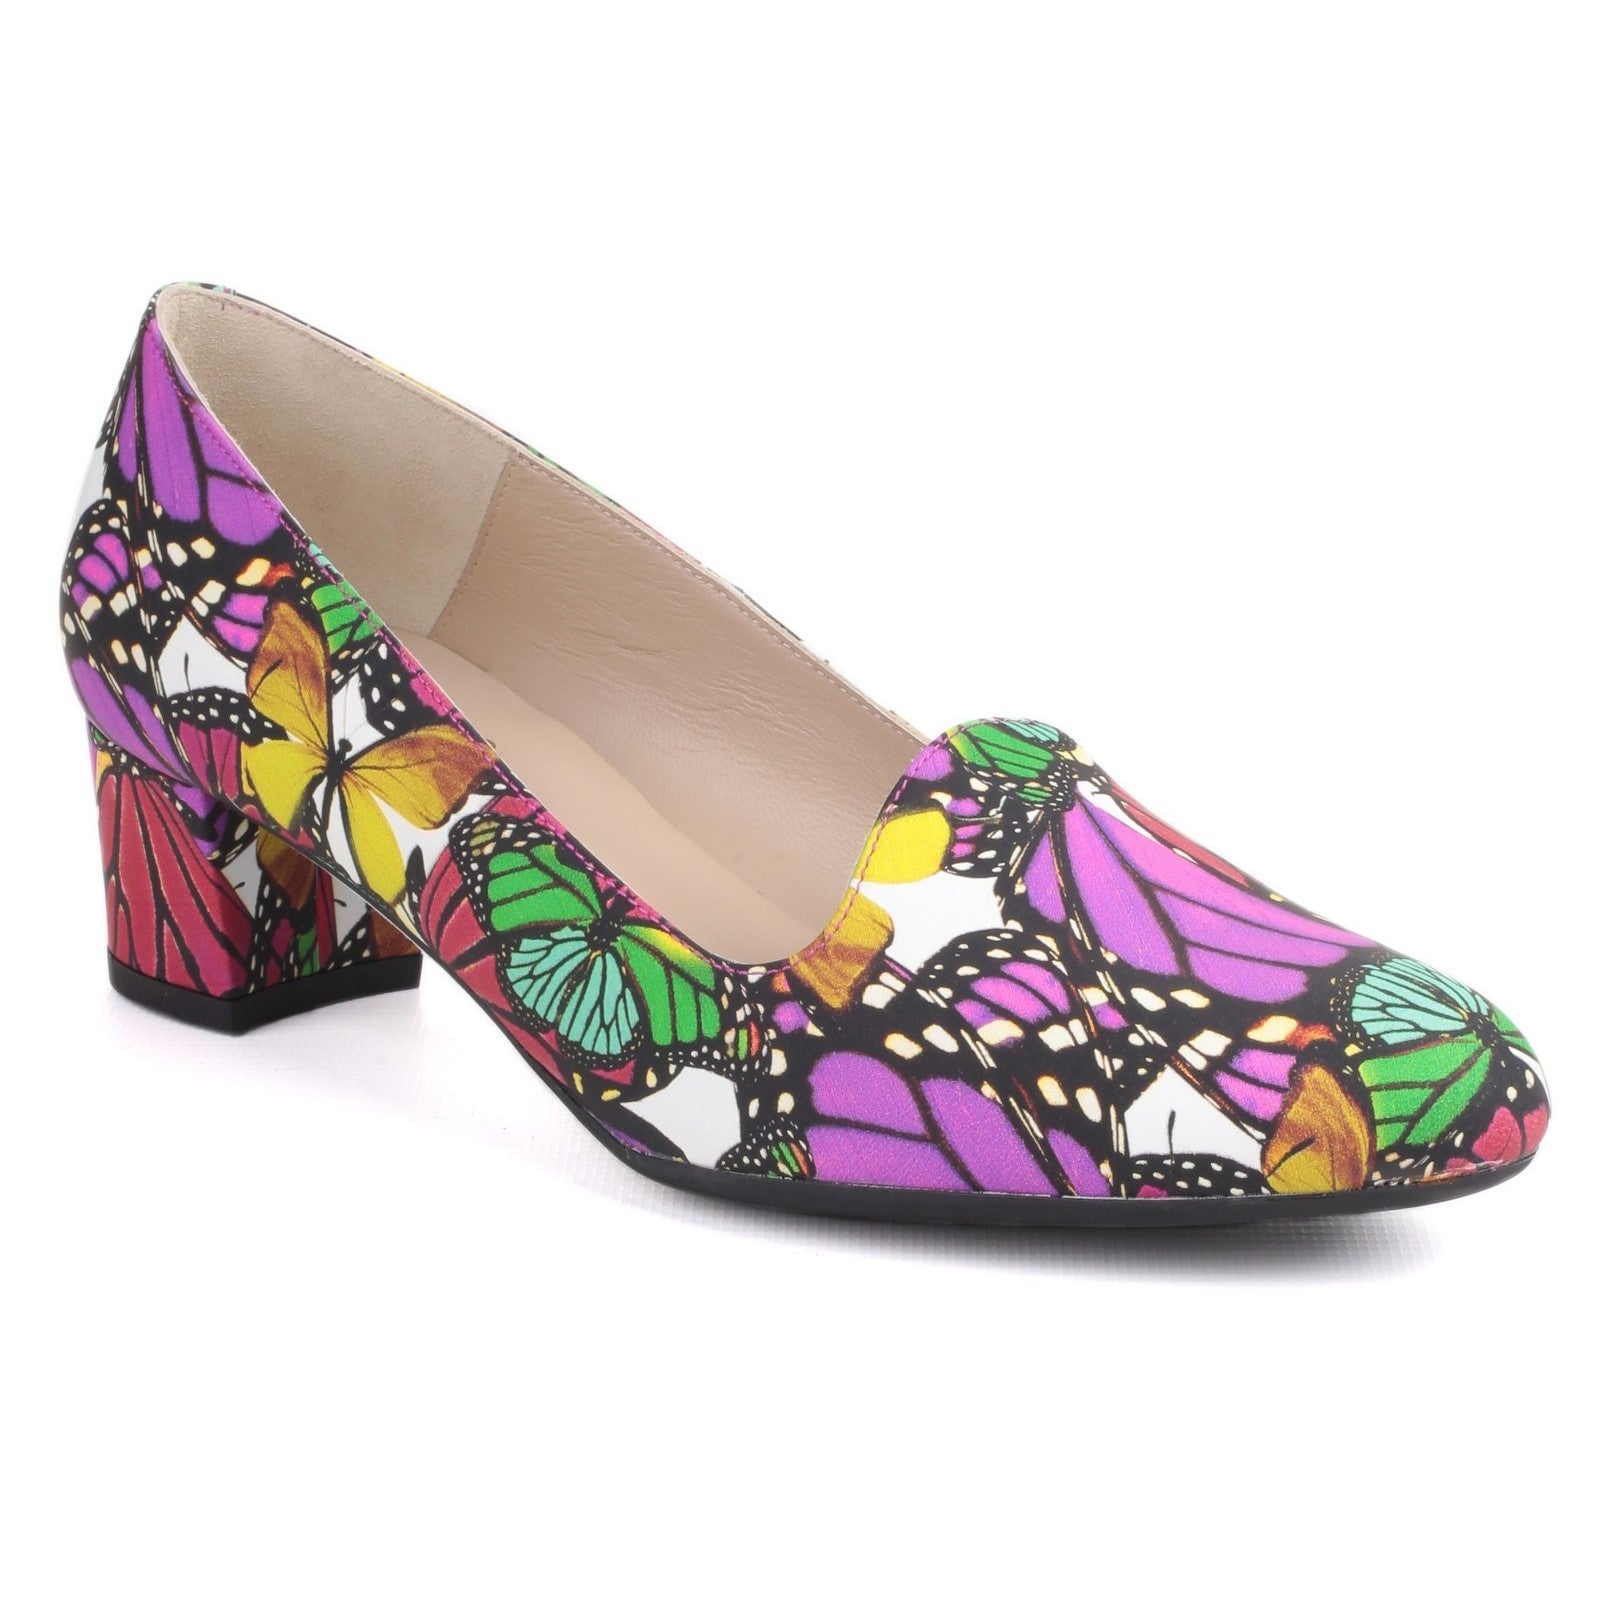 Riva Pizzo Florel Printed Leather Sandals